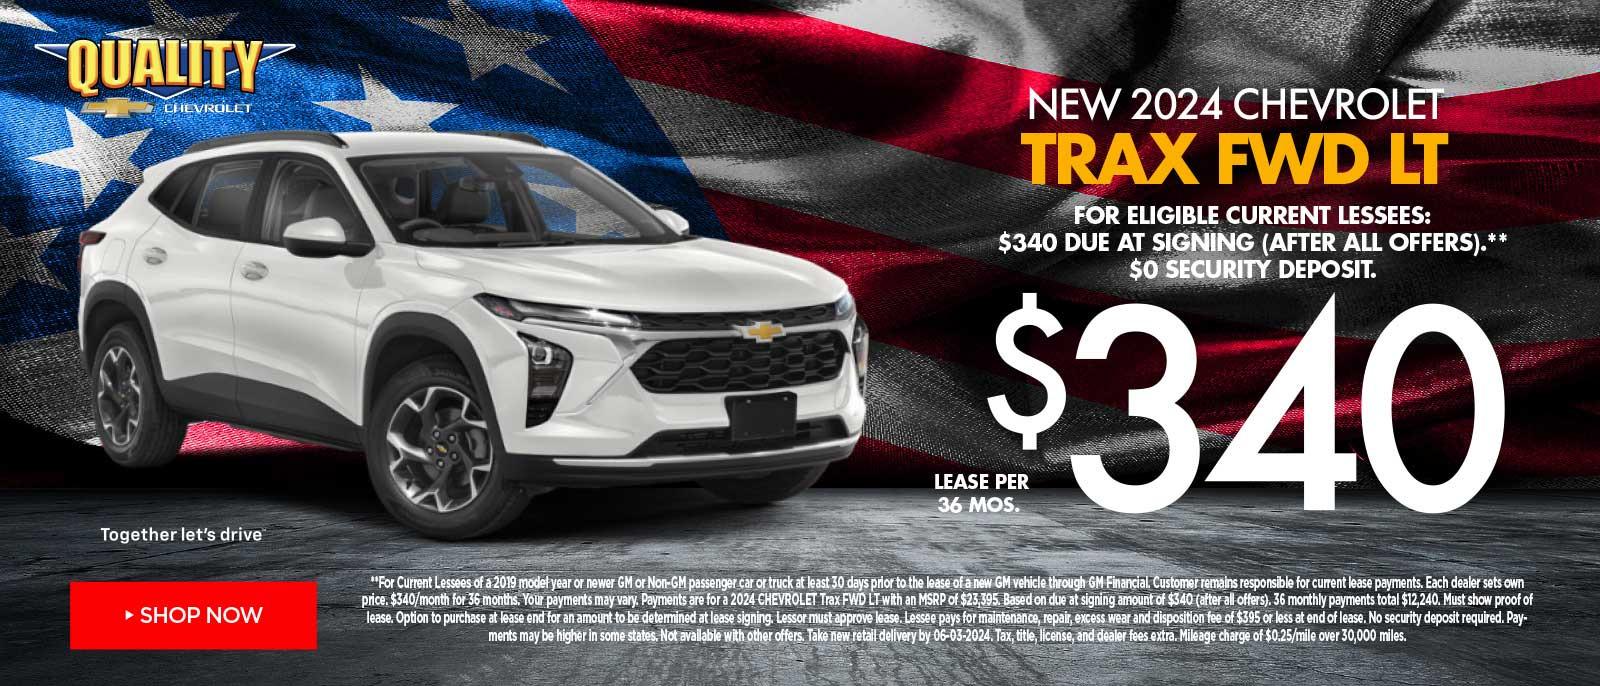 New 2024 Chevrolet Trax FWD LT $340/36 Month Lease